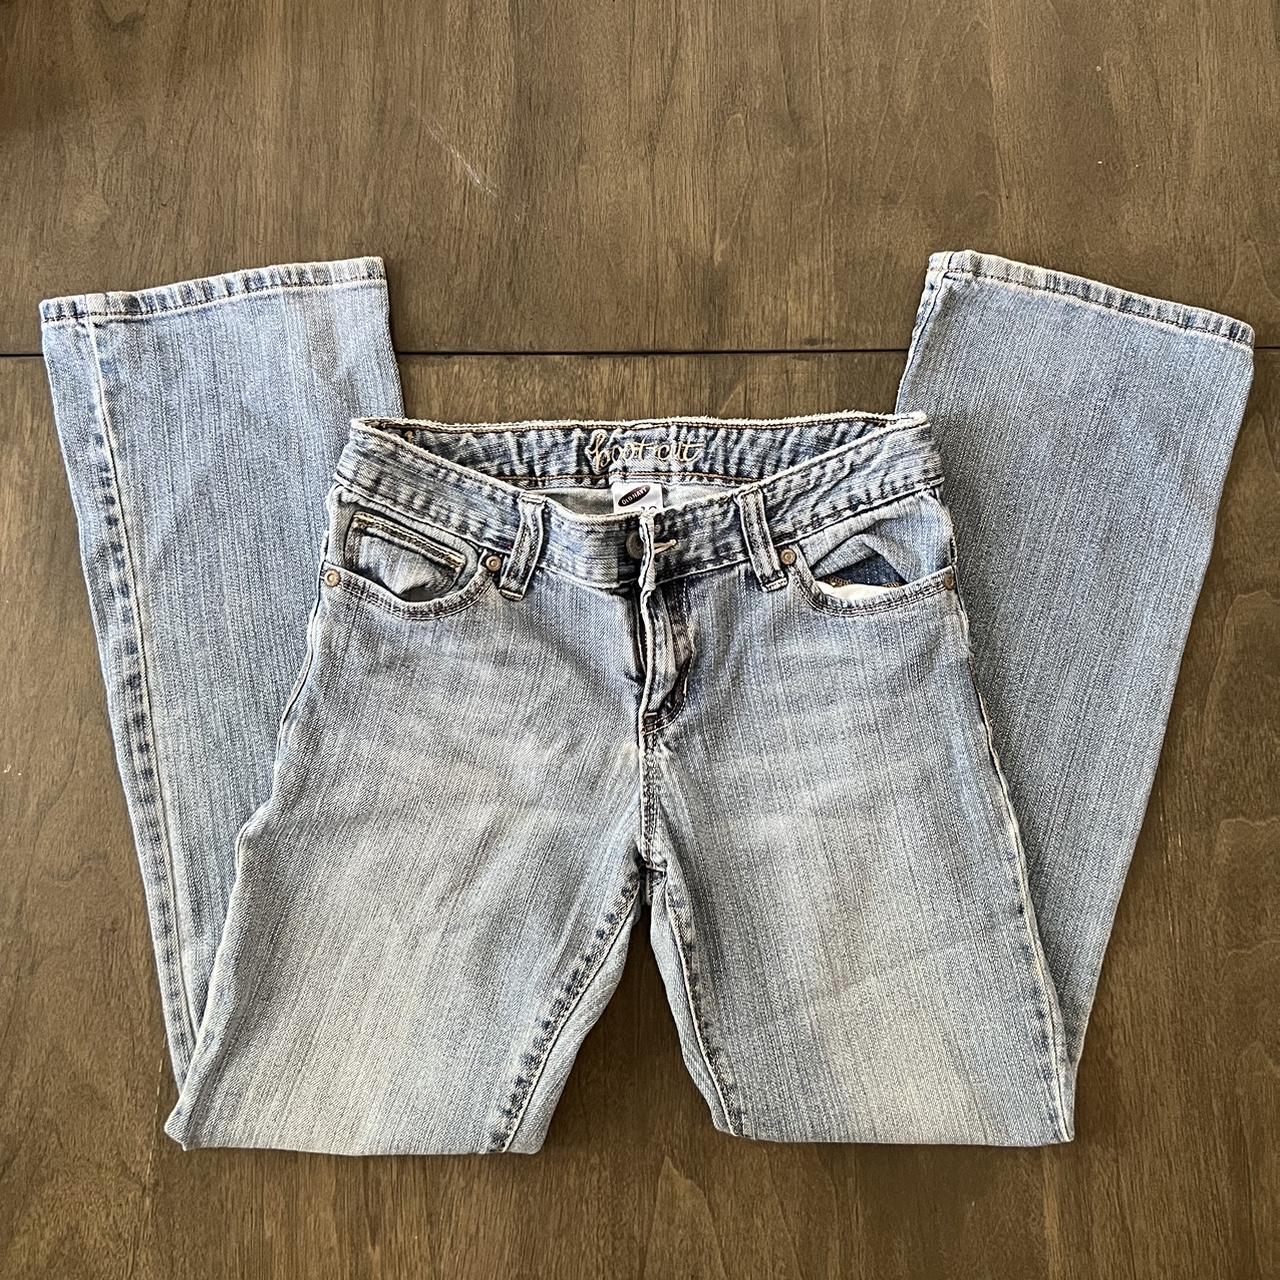 2000s low rise flare jeans perfect for girls on... - Depop